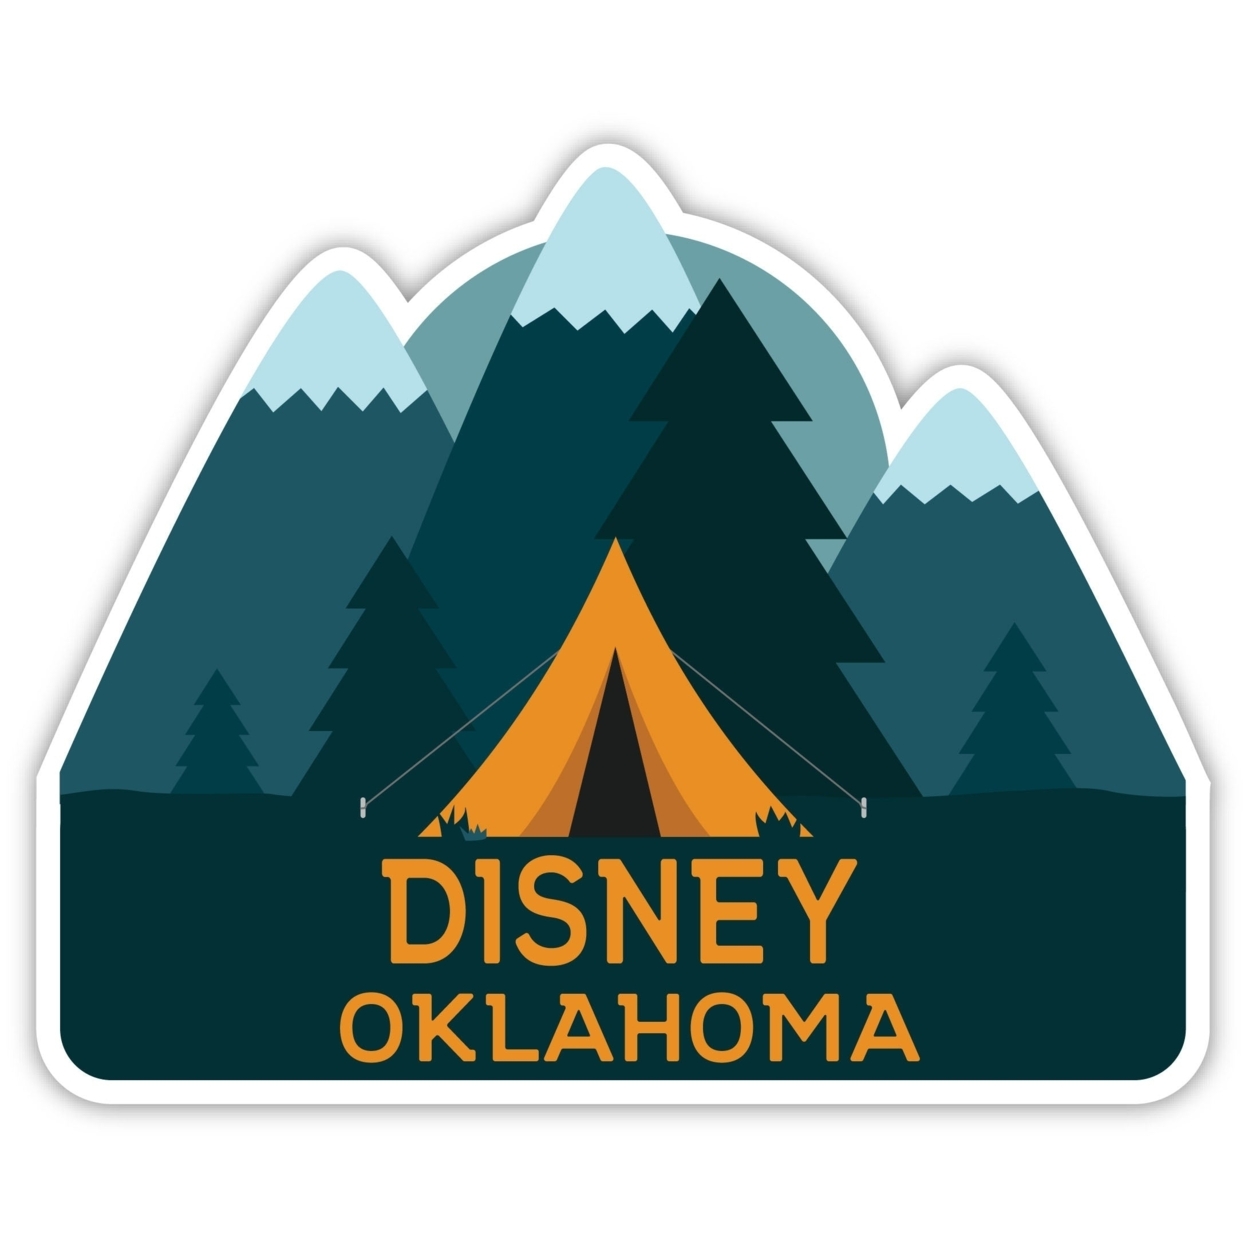 Disney Oklahoma Souvenir Decorative Stickers (Choose Theme And Size) - 4-Pack, 10-Inch, Tent